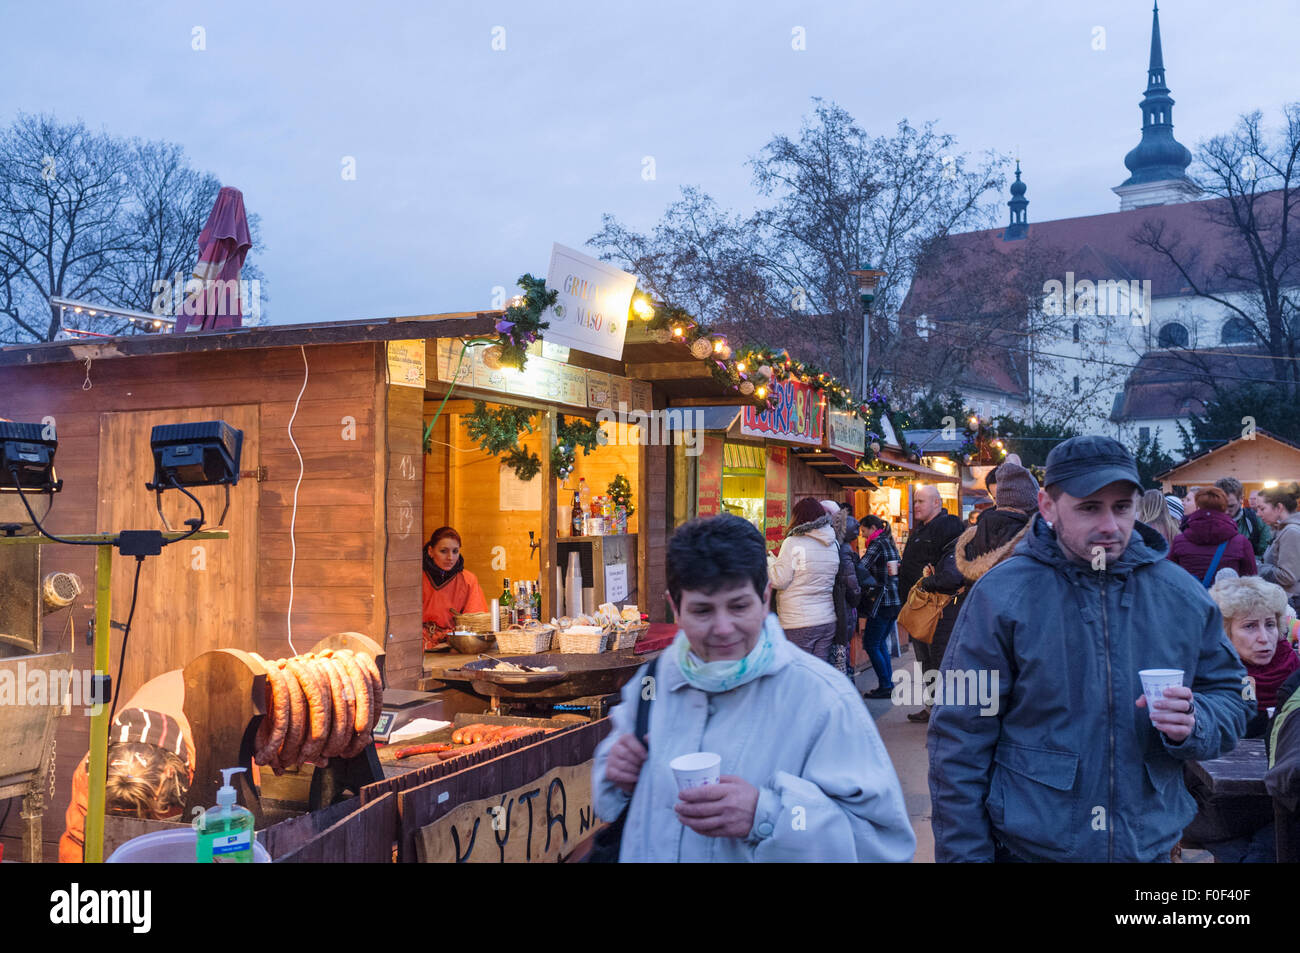 People at a Christmas market in Brno, Czech Republic Stock Photo